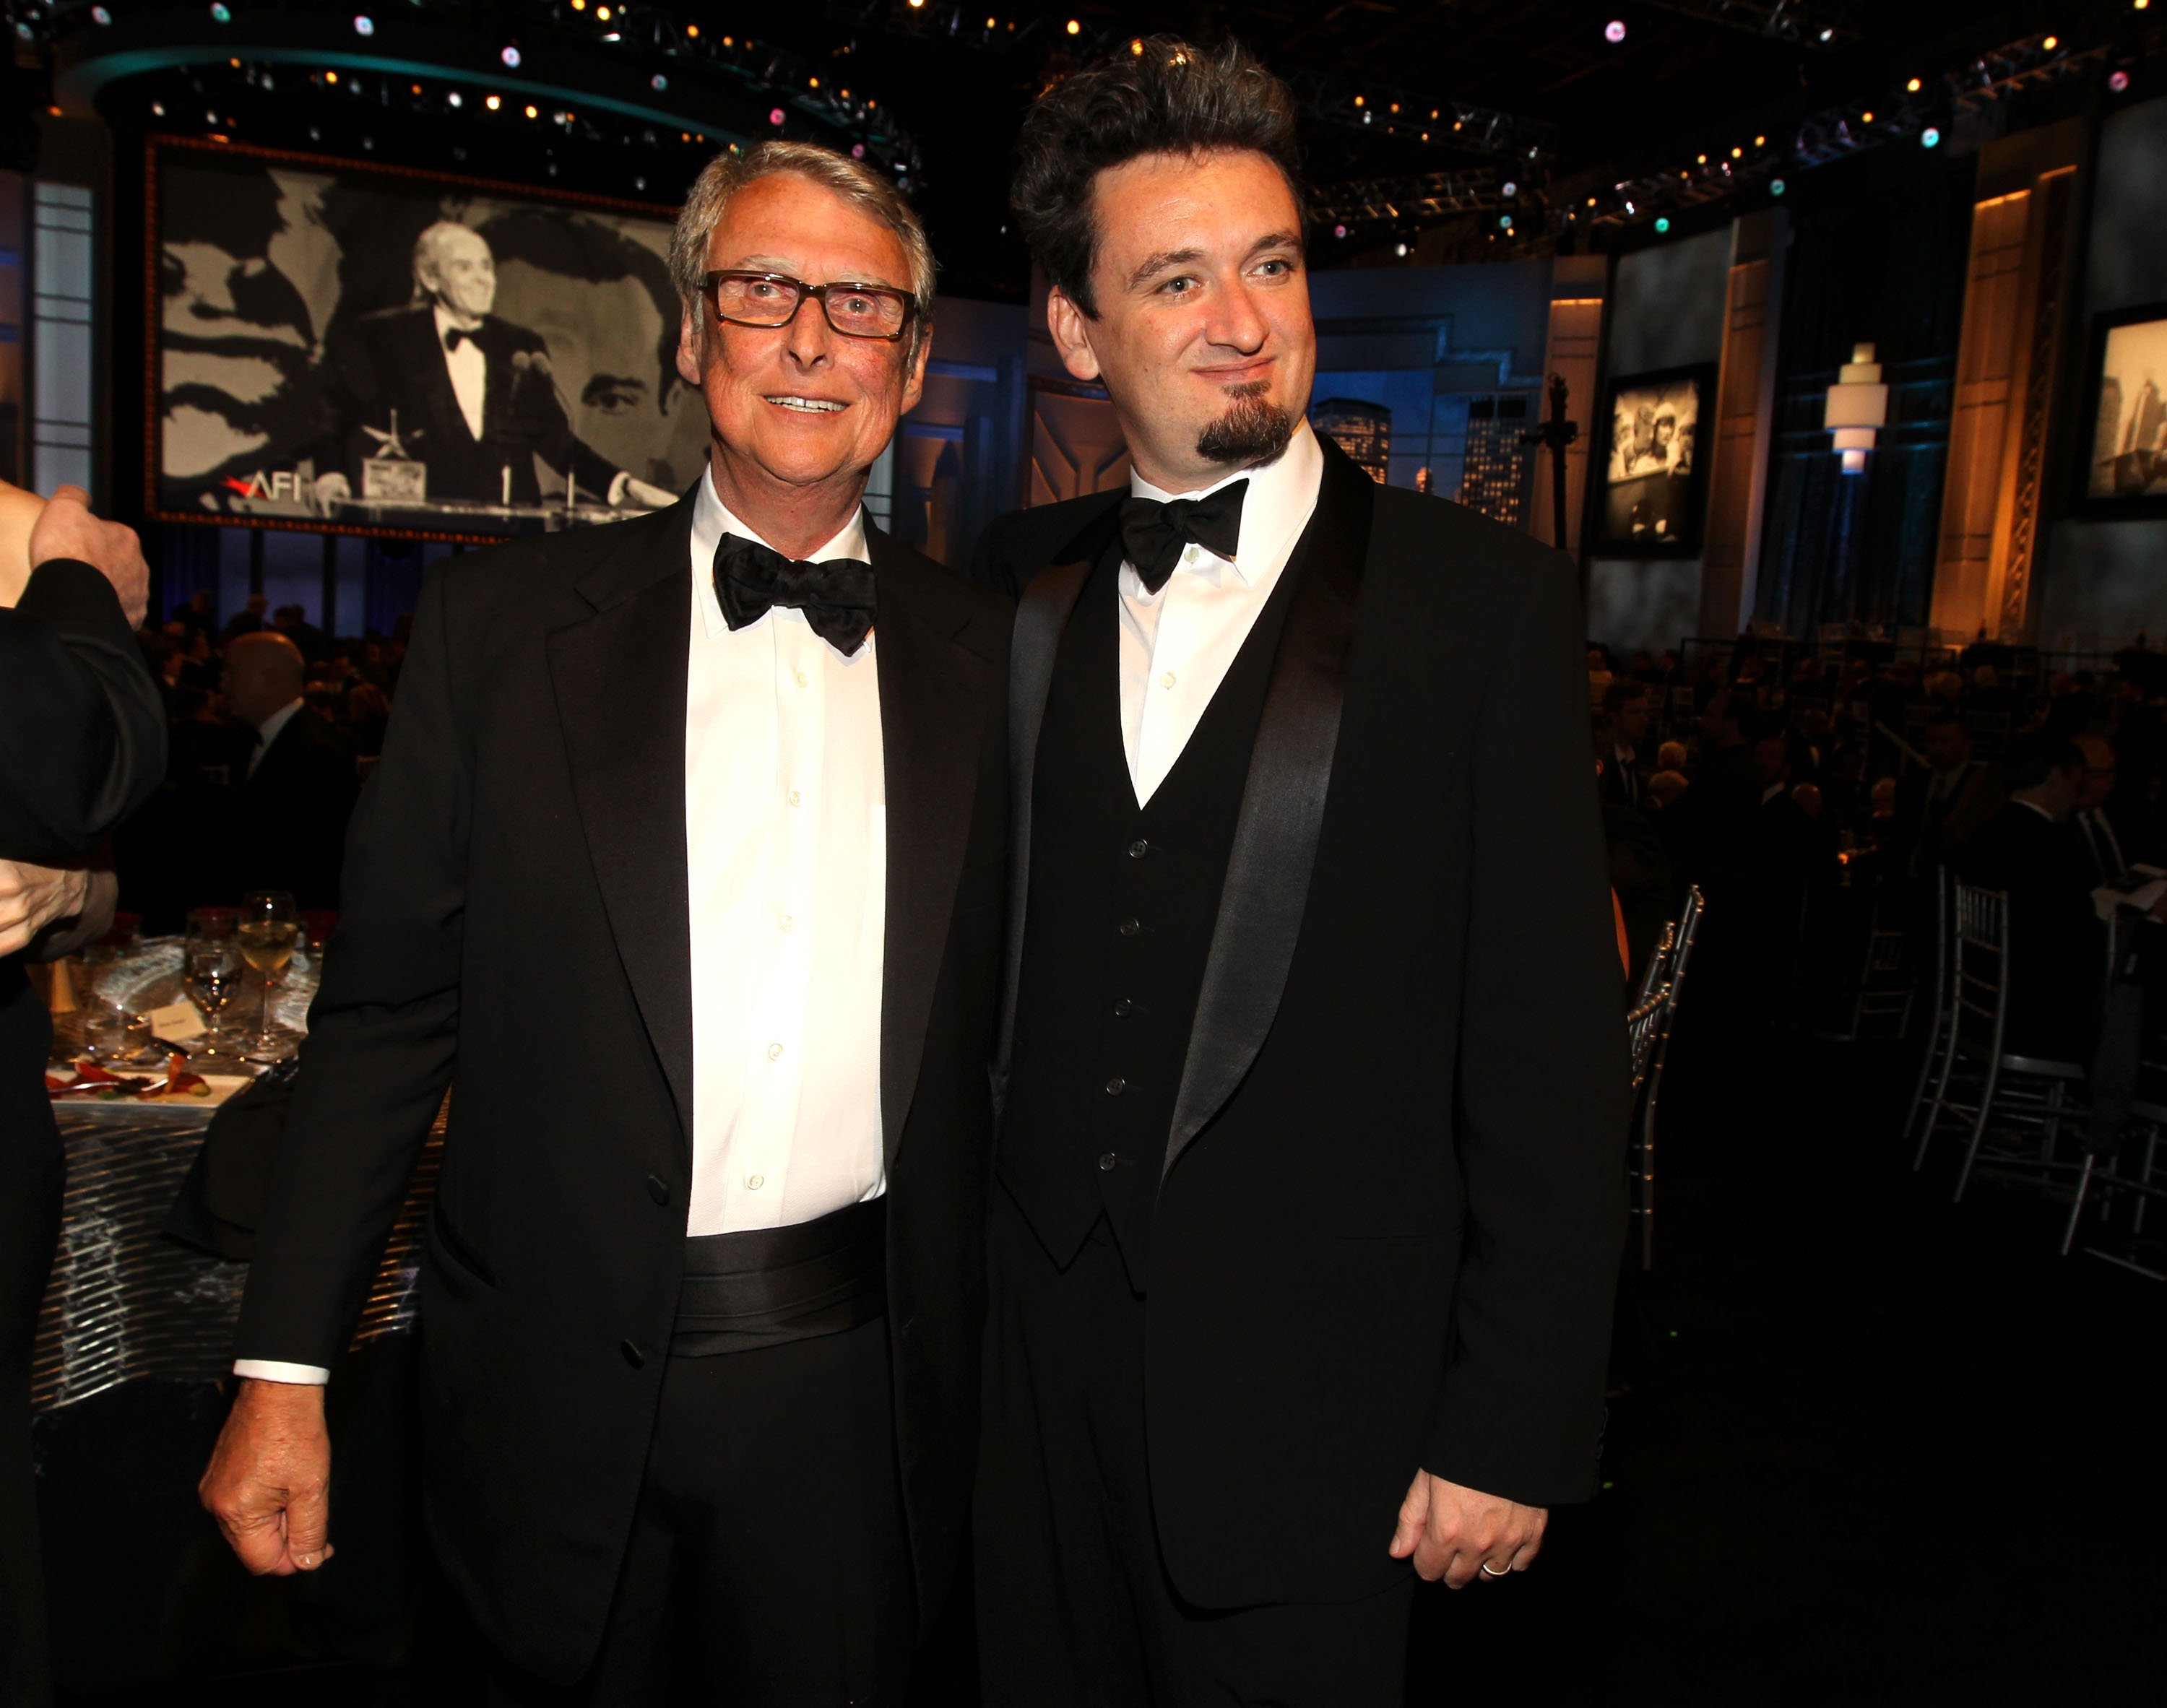 Mike Nichols and his son Max Nichols at the 38th AFI Life Achievement Award honoring Mike Nichols in 2010 in Culver City, CA.  |  Source: Getty Images